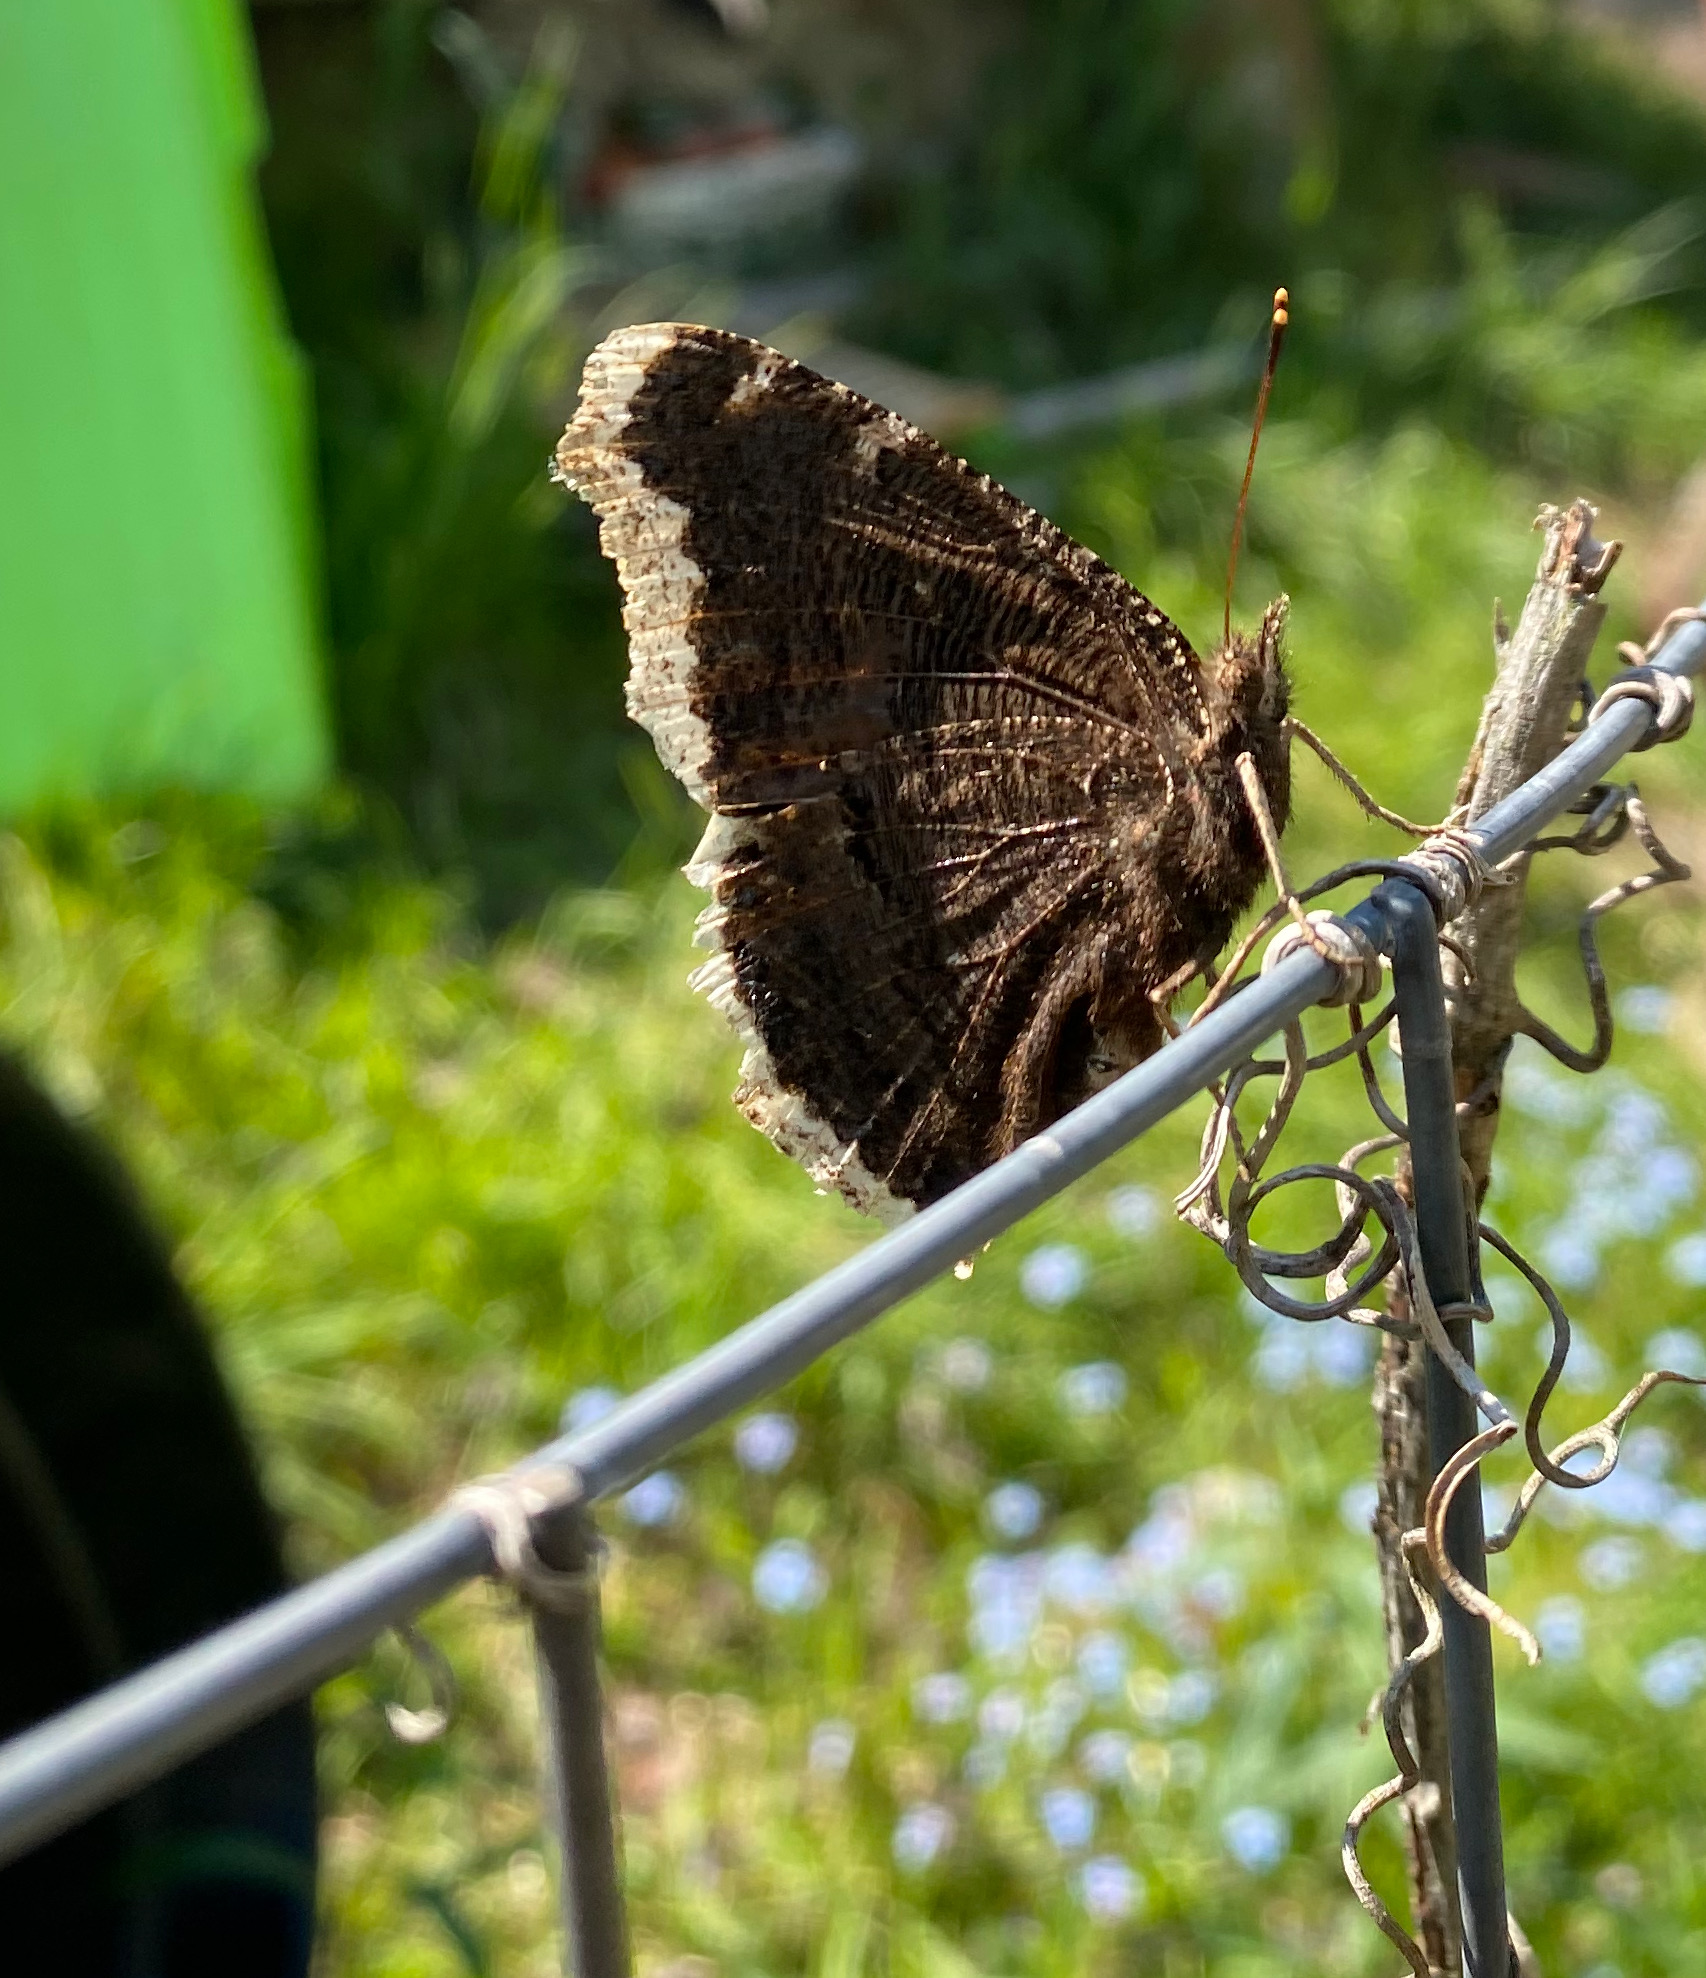 A mourning cloak butterfly sitting on a fence.